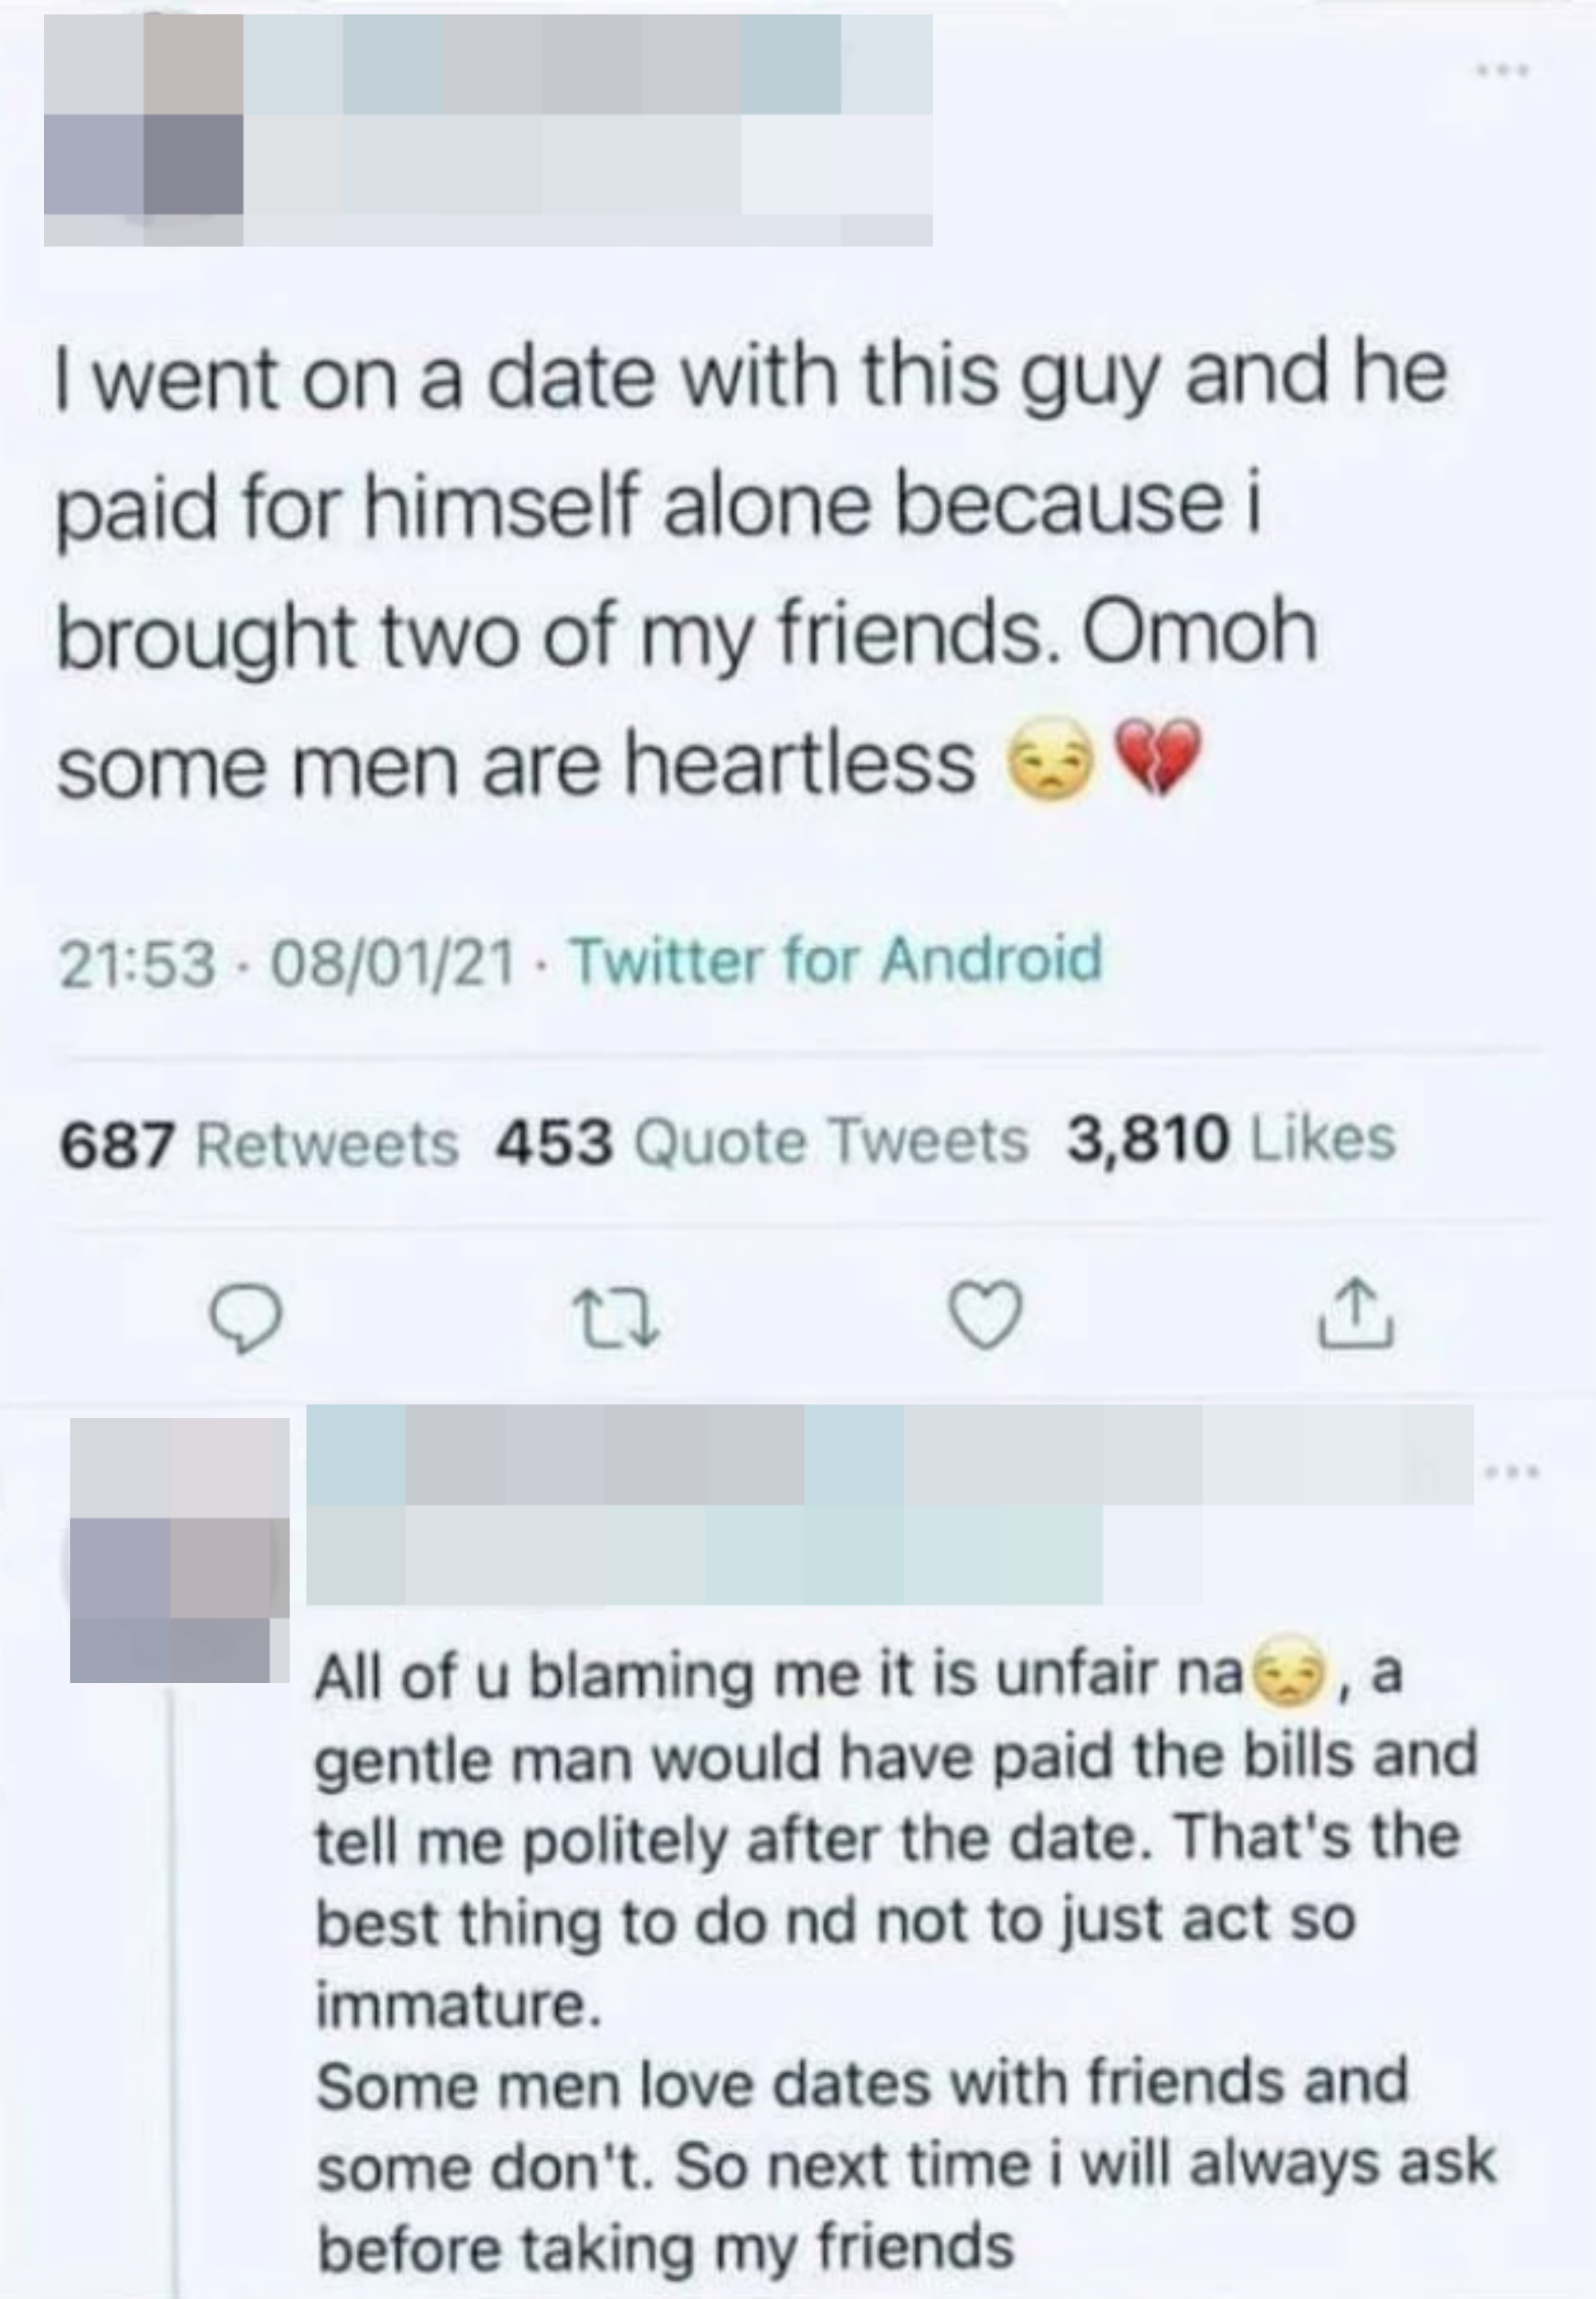 i went on a date and he paid for himself alone because i brought two of my friends, some men are so heartless